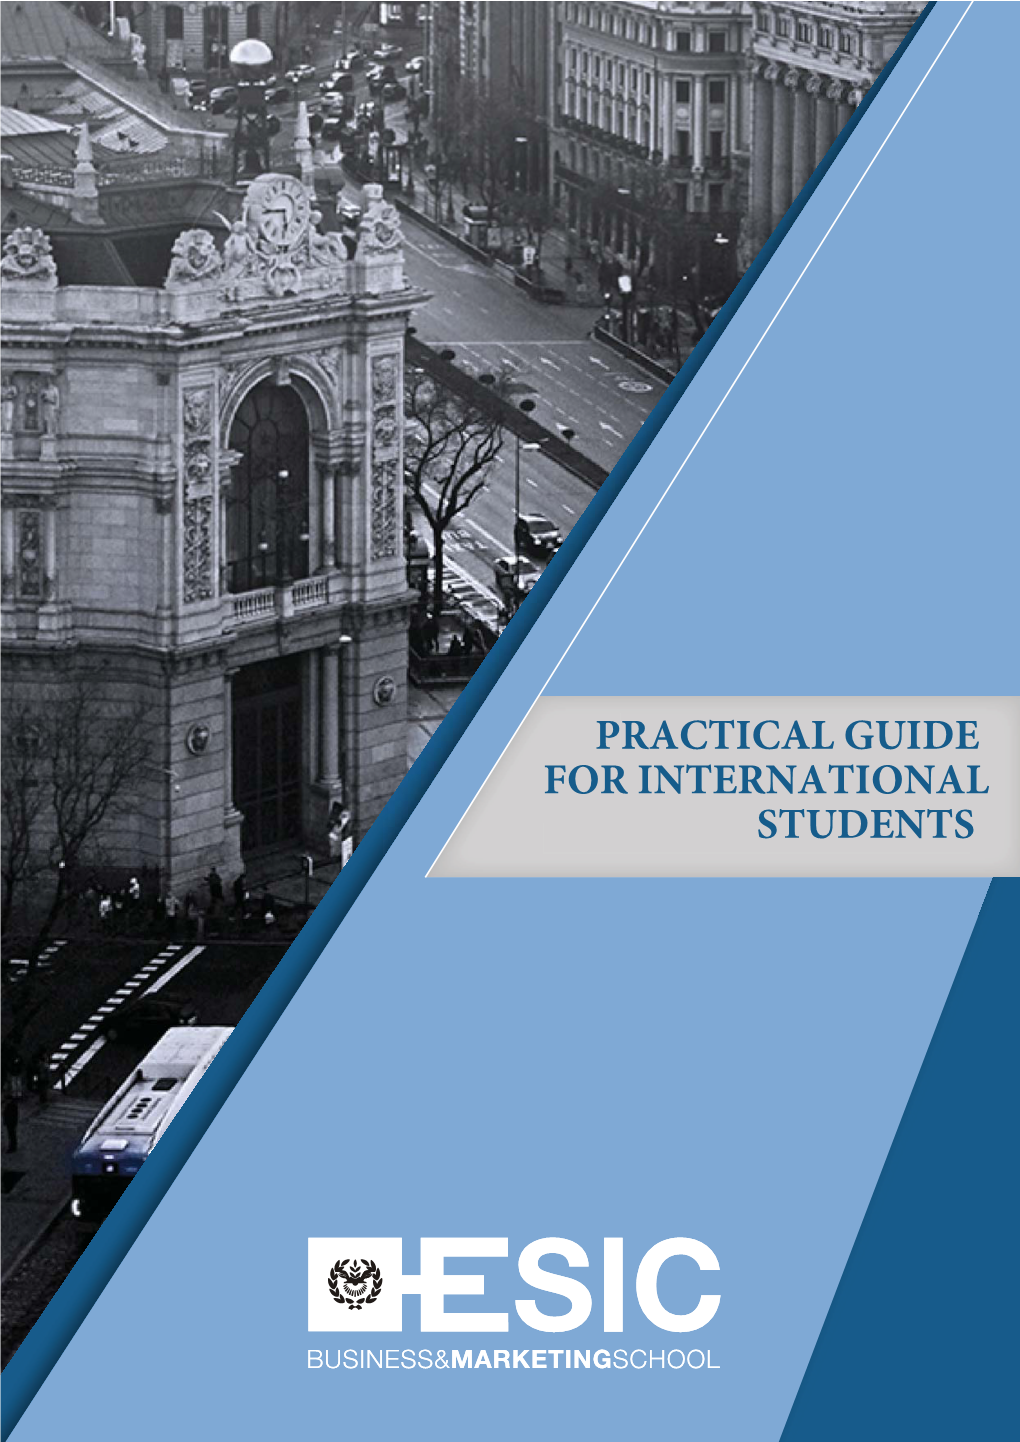 Practical Guide for International Students